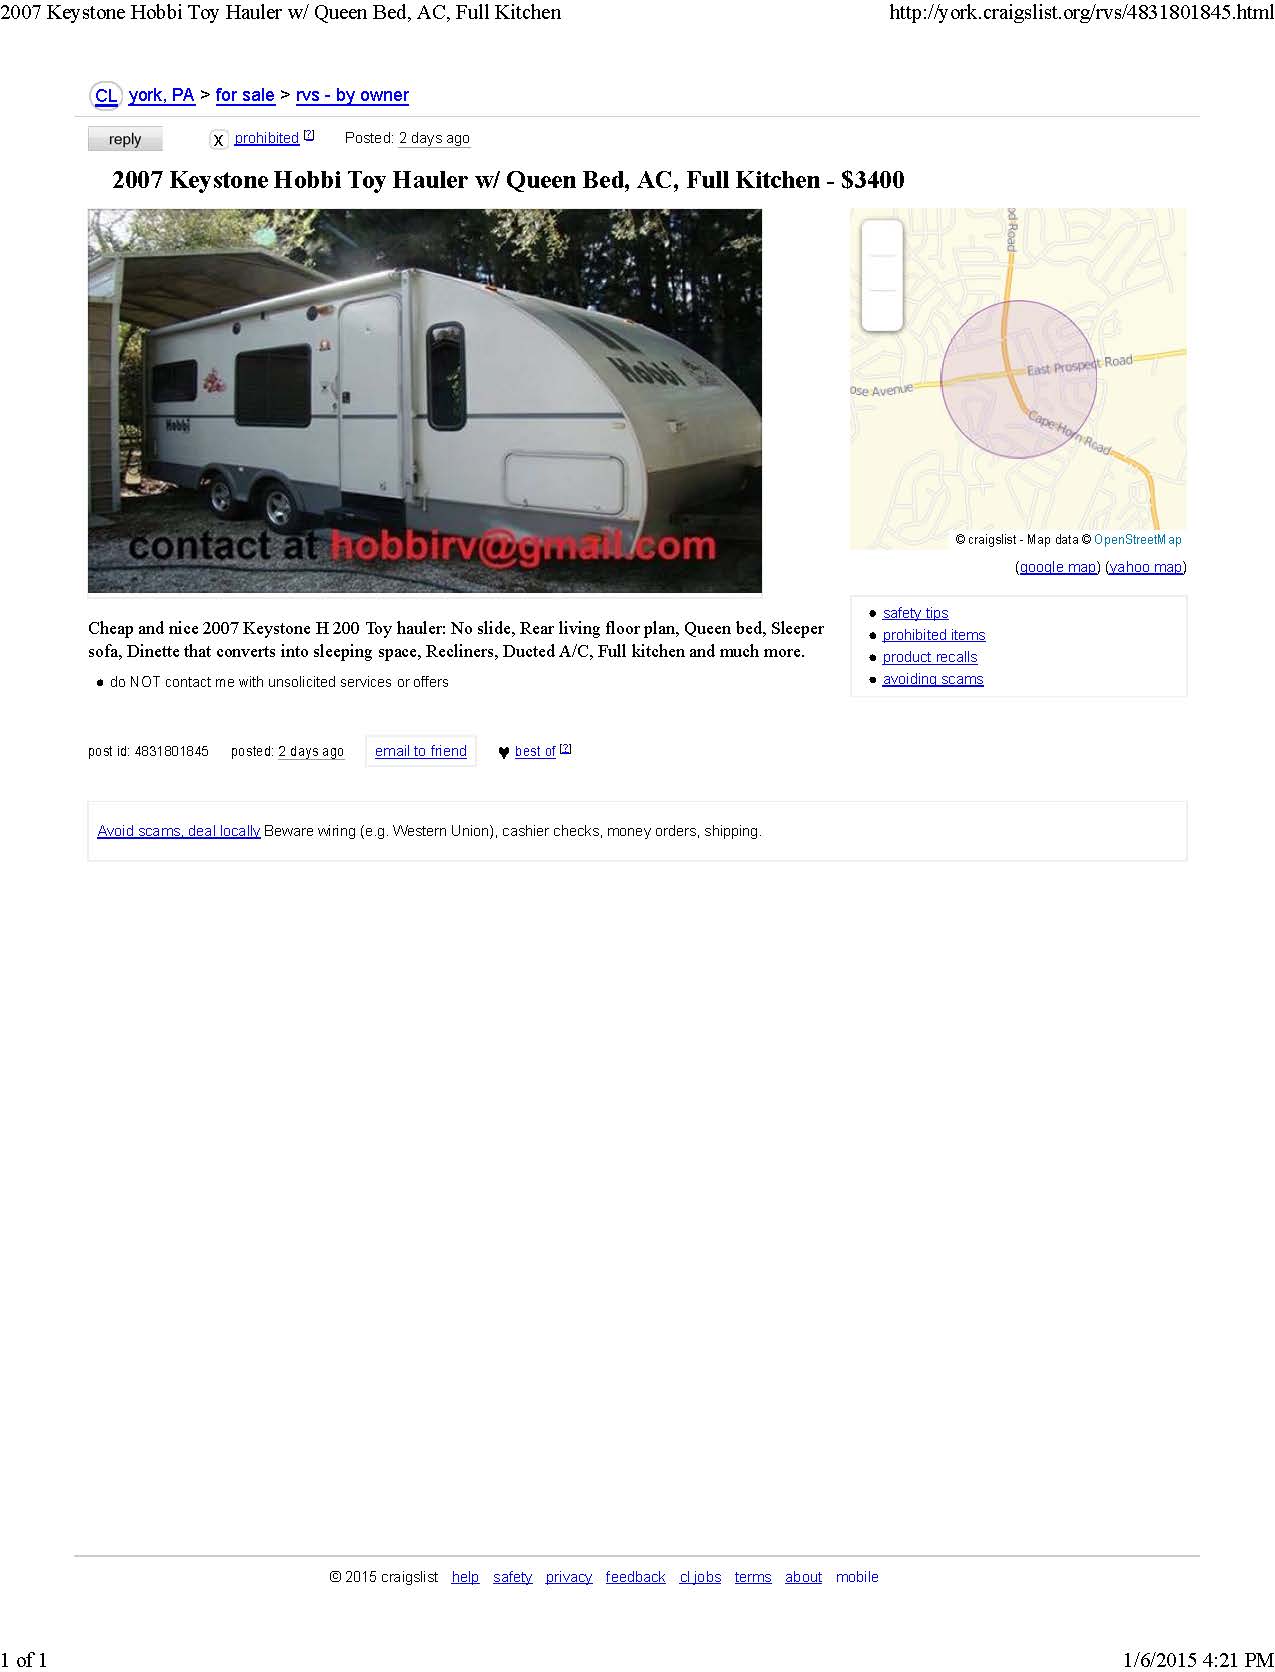 Fake craigslist ad posted by scammer  Rita Leon